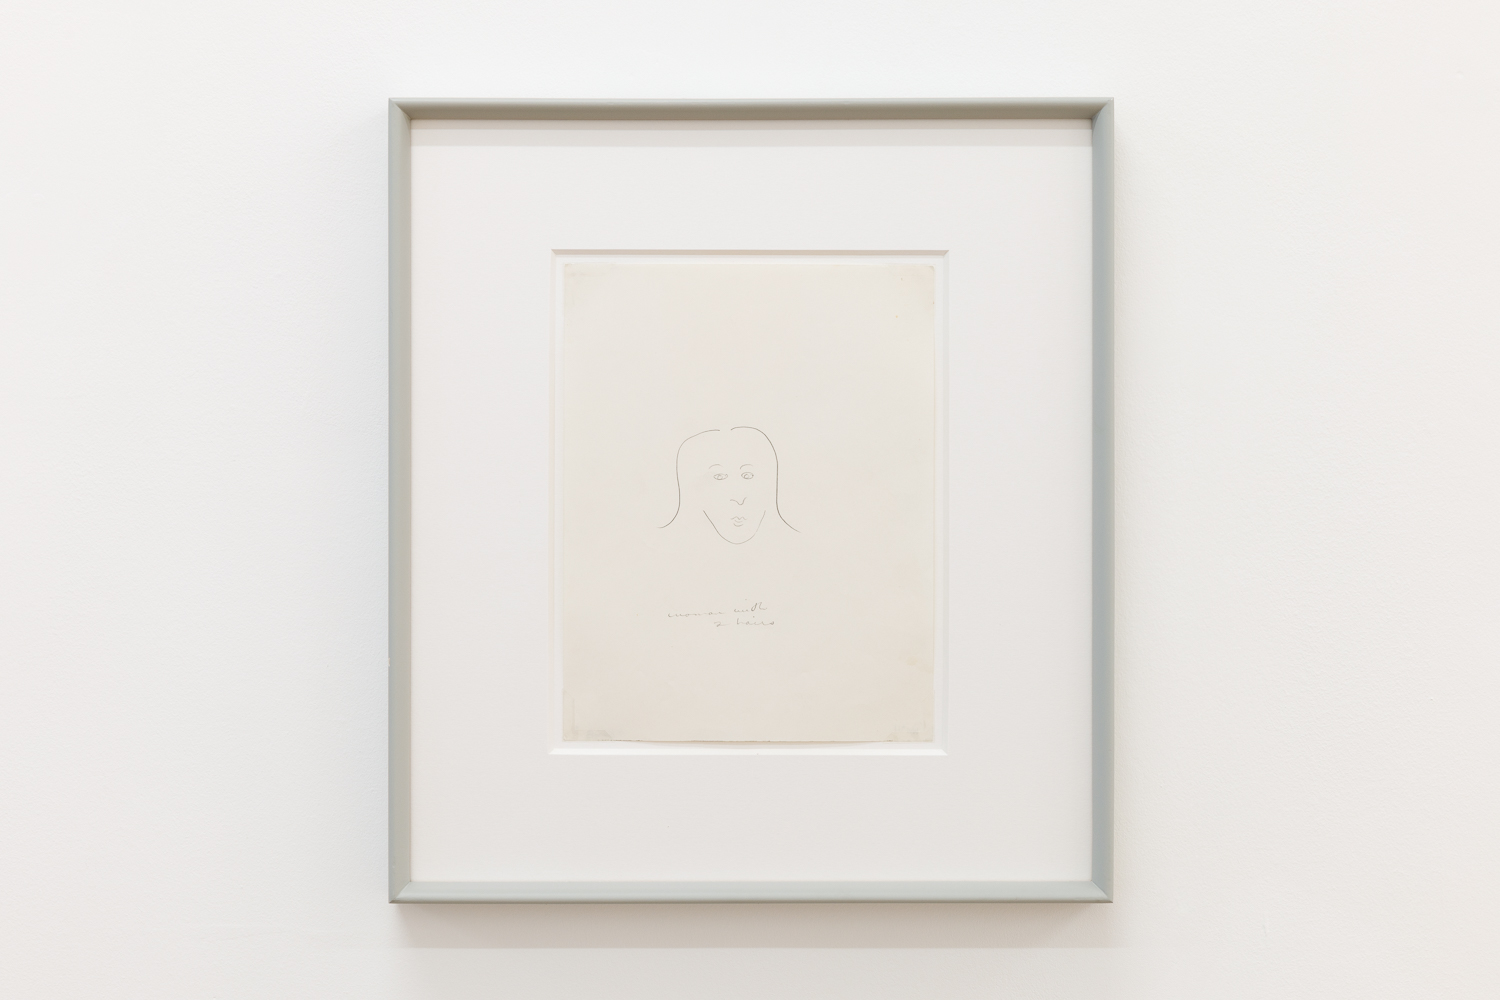 Woman with Two Hairs, William Wegman, Drawing by Artist. Huxley-Parlour Gallery, 45 Maddox Street London, W1S 2PE.